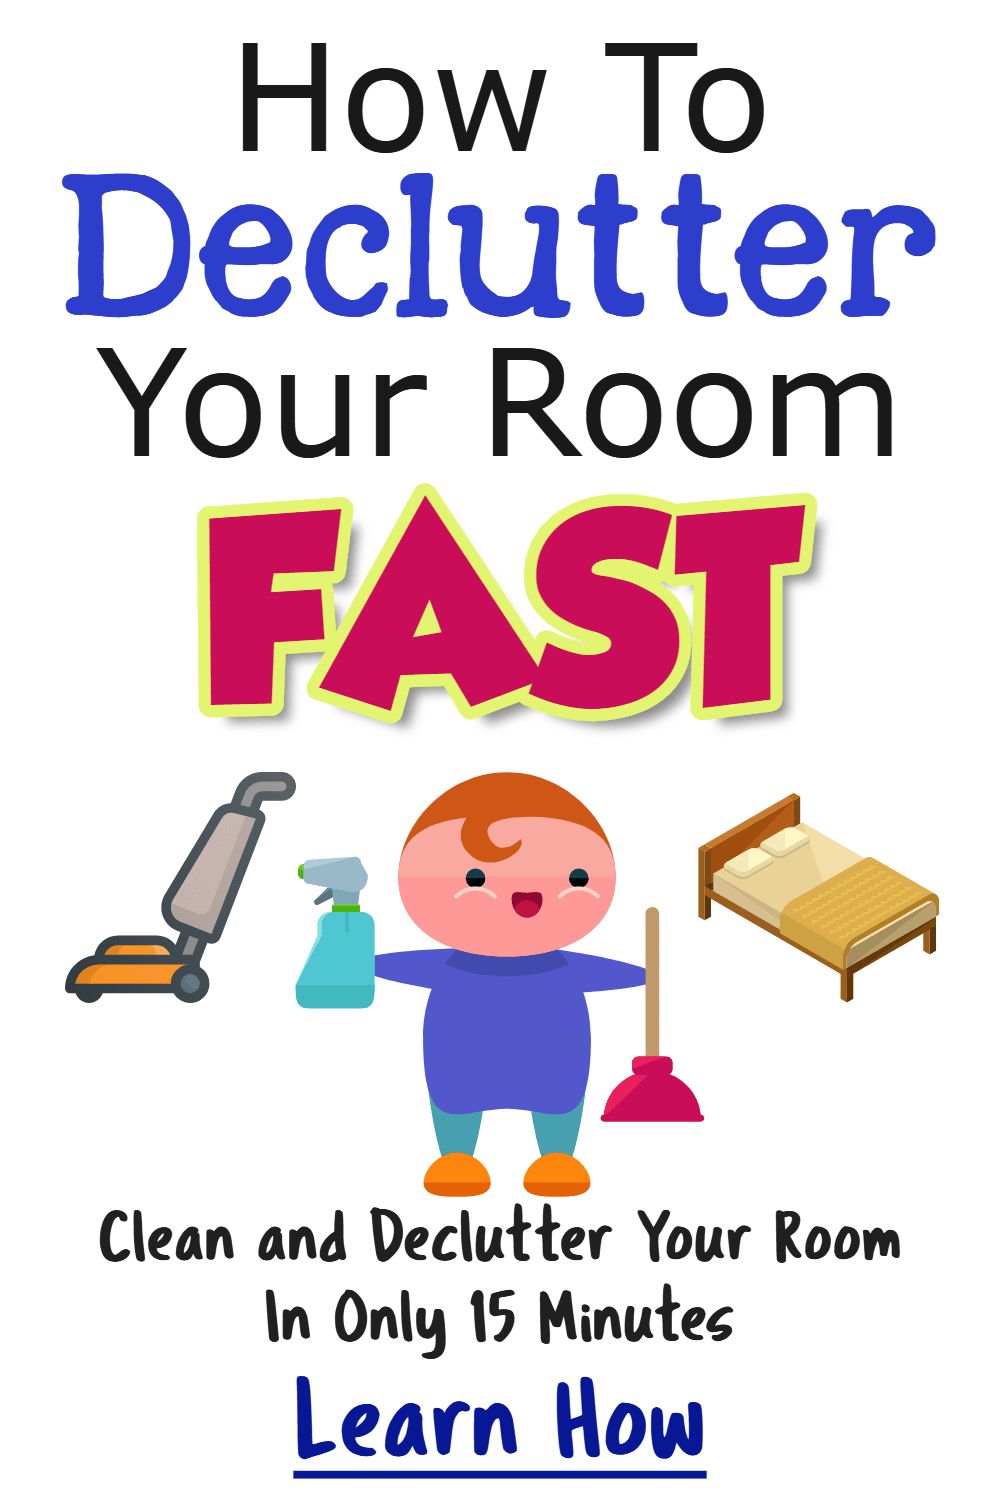 How to declutter your room - let me show you how to declutter your room FAST!  Want to know how to declutter your bedroom? Here's how to declutter and organize your room when you want to know how to declutter your home one room at a time.  Declutter your room WITHOUT feeling overwhelmed!